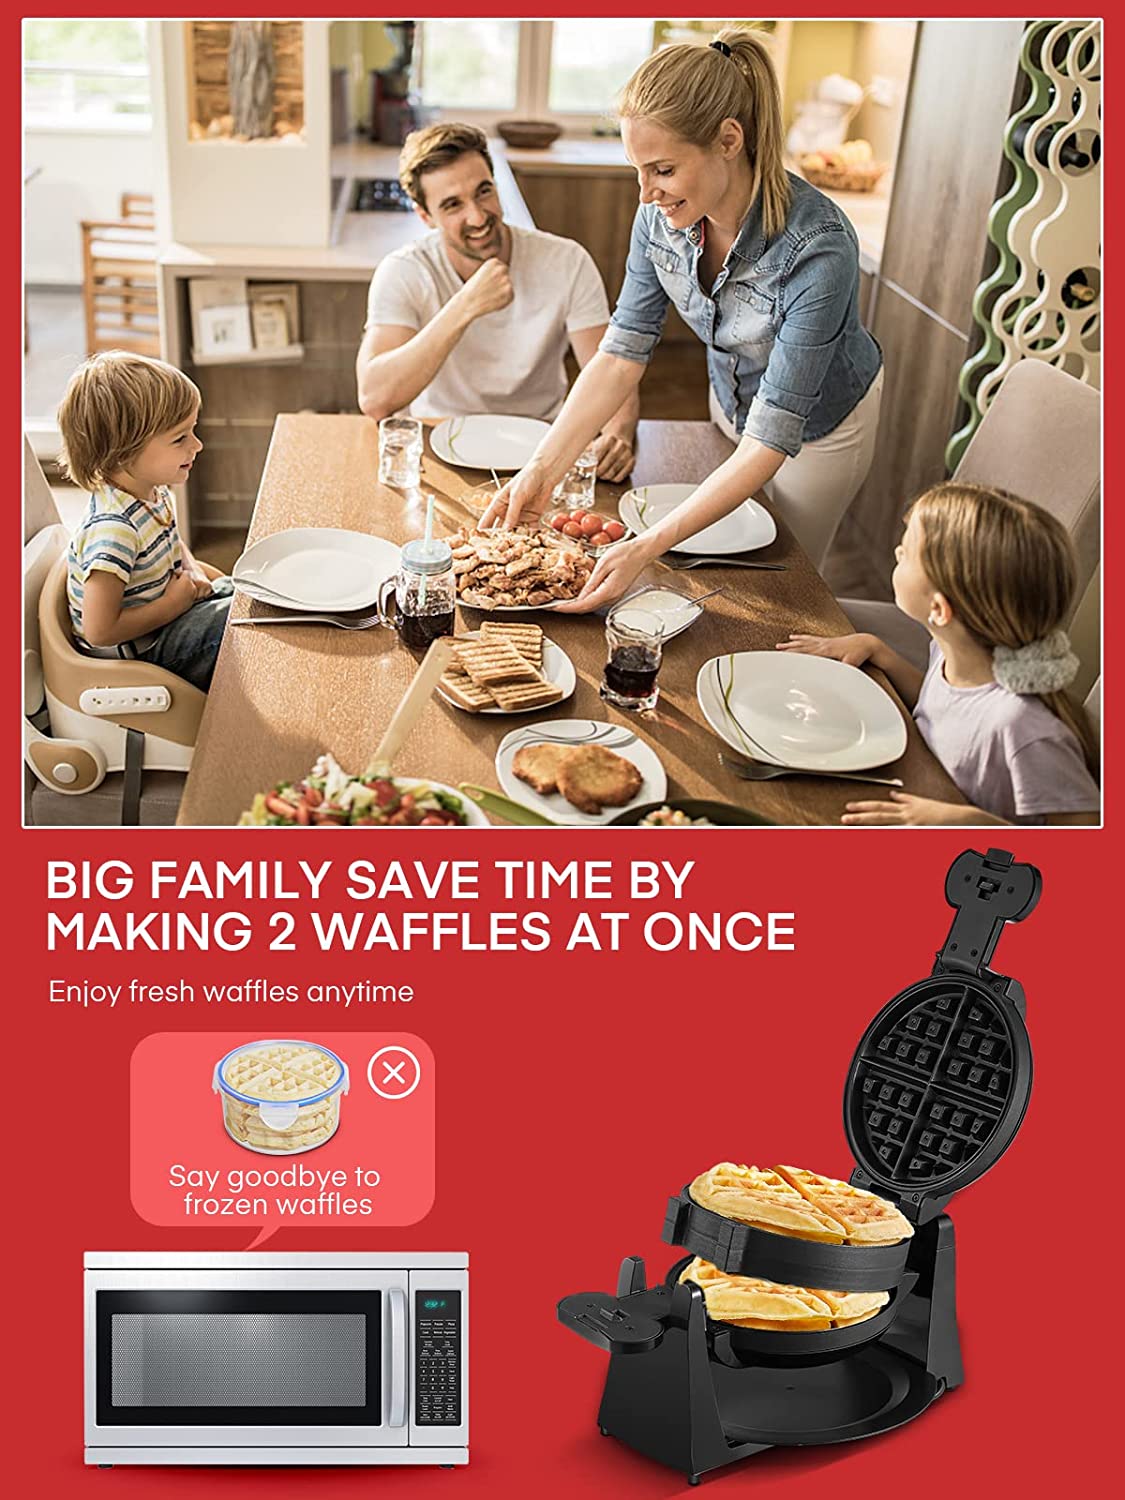 big family save time by making 2 waffles at once, Waffle Maker, Belgian Waffle Maker Iron 180° Flip Double Waffle, 8 Slices, Rotating & Nonstick Plates, Removable Drip Tray, Cool Touch Handle, Black, 1400W